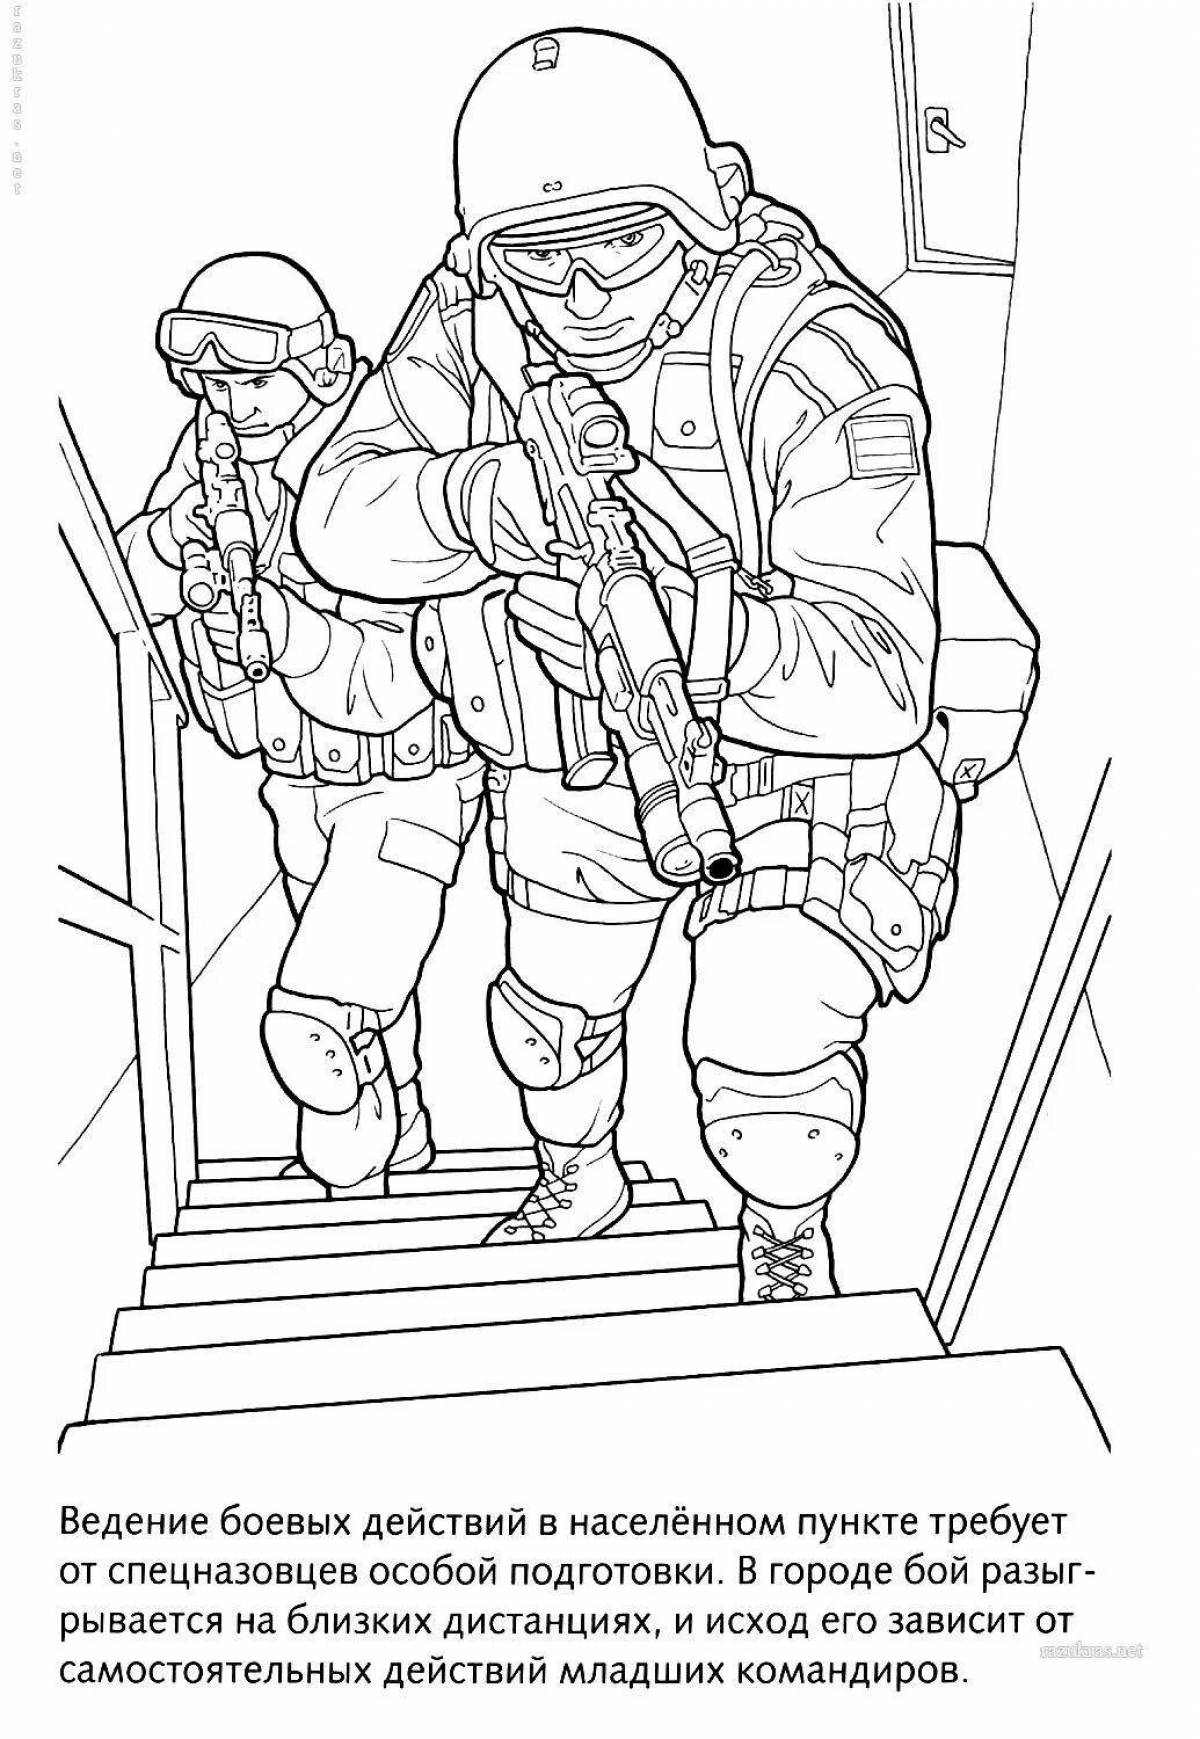 Fierce Russian special forces coloring page